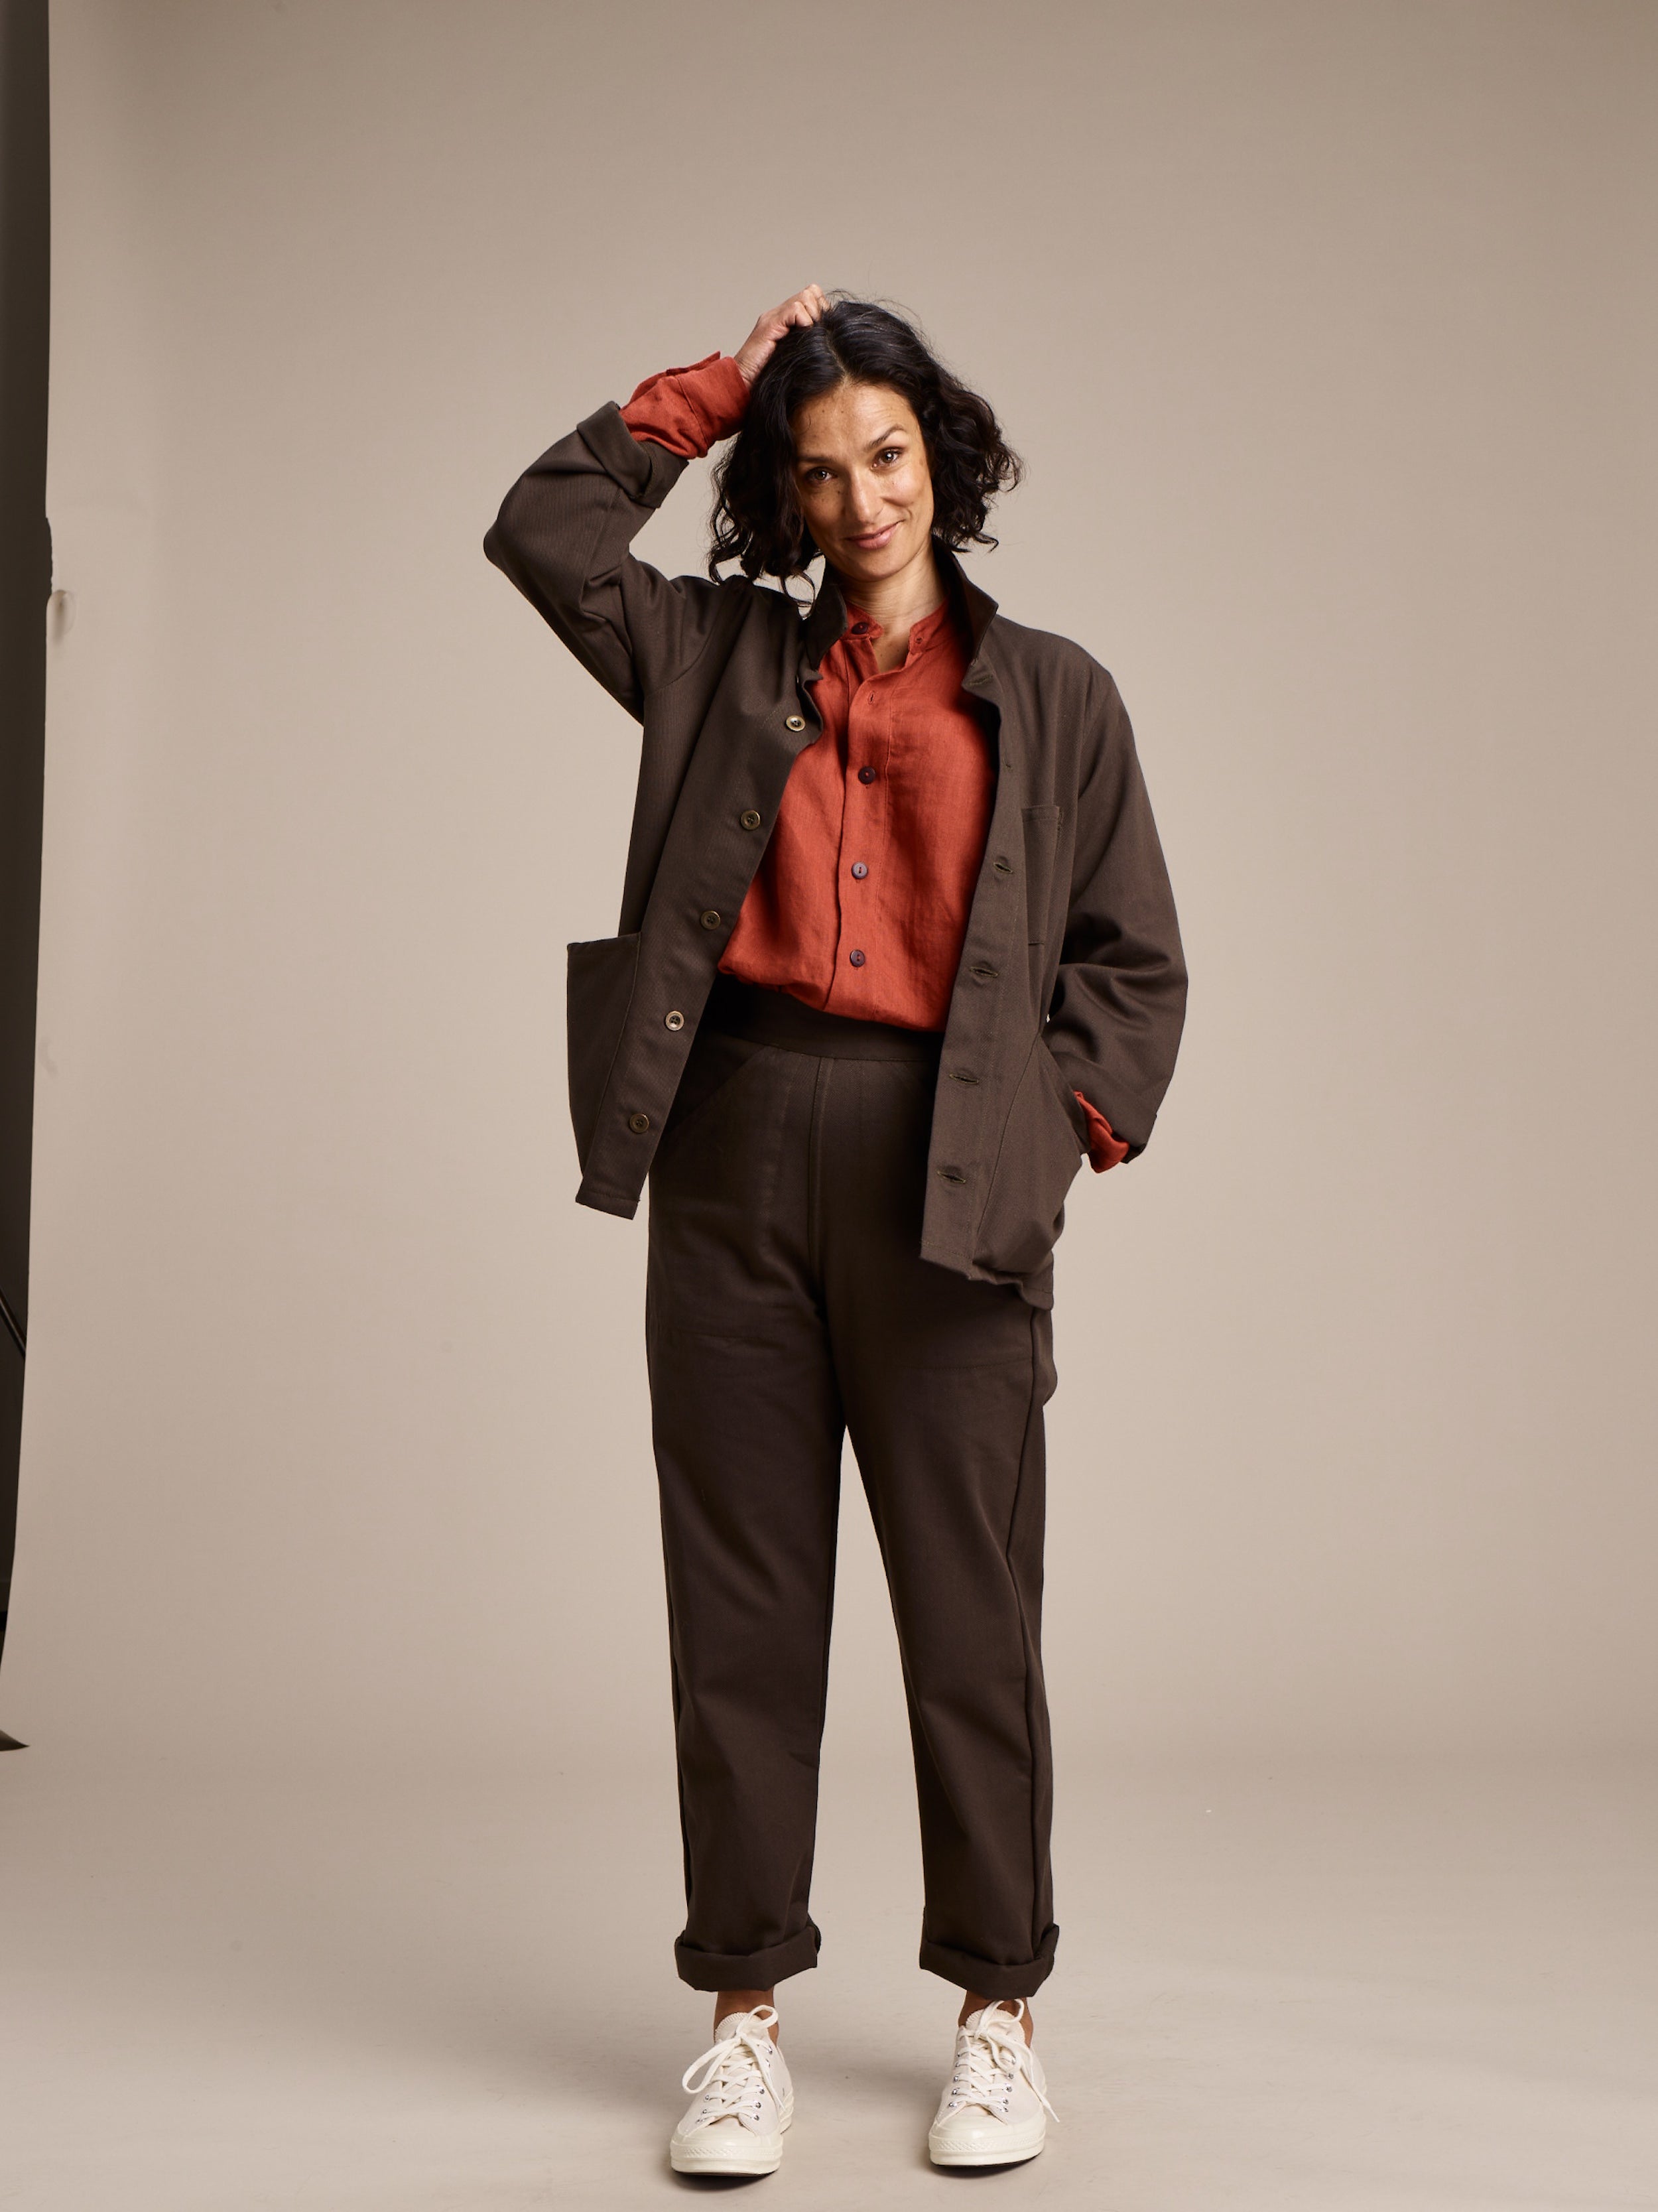 Woman wearing Carrier Company Women's Work Trouser in Olive with Norfolk Work Jacket and Linen Work Shirt